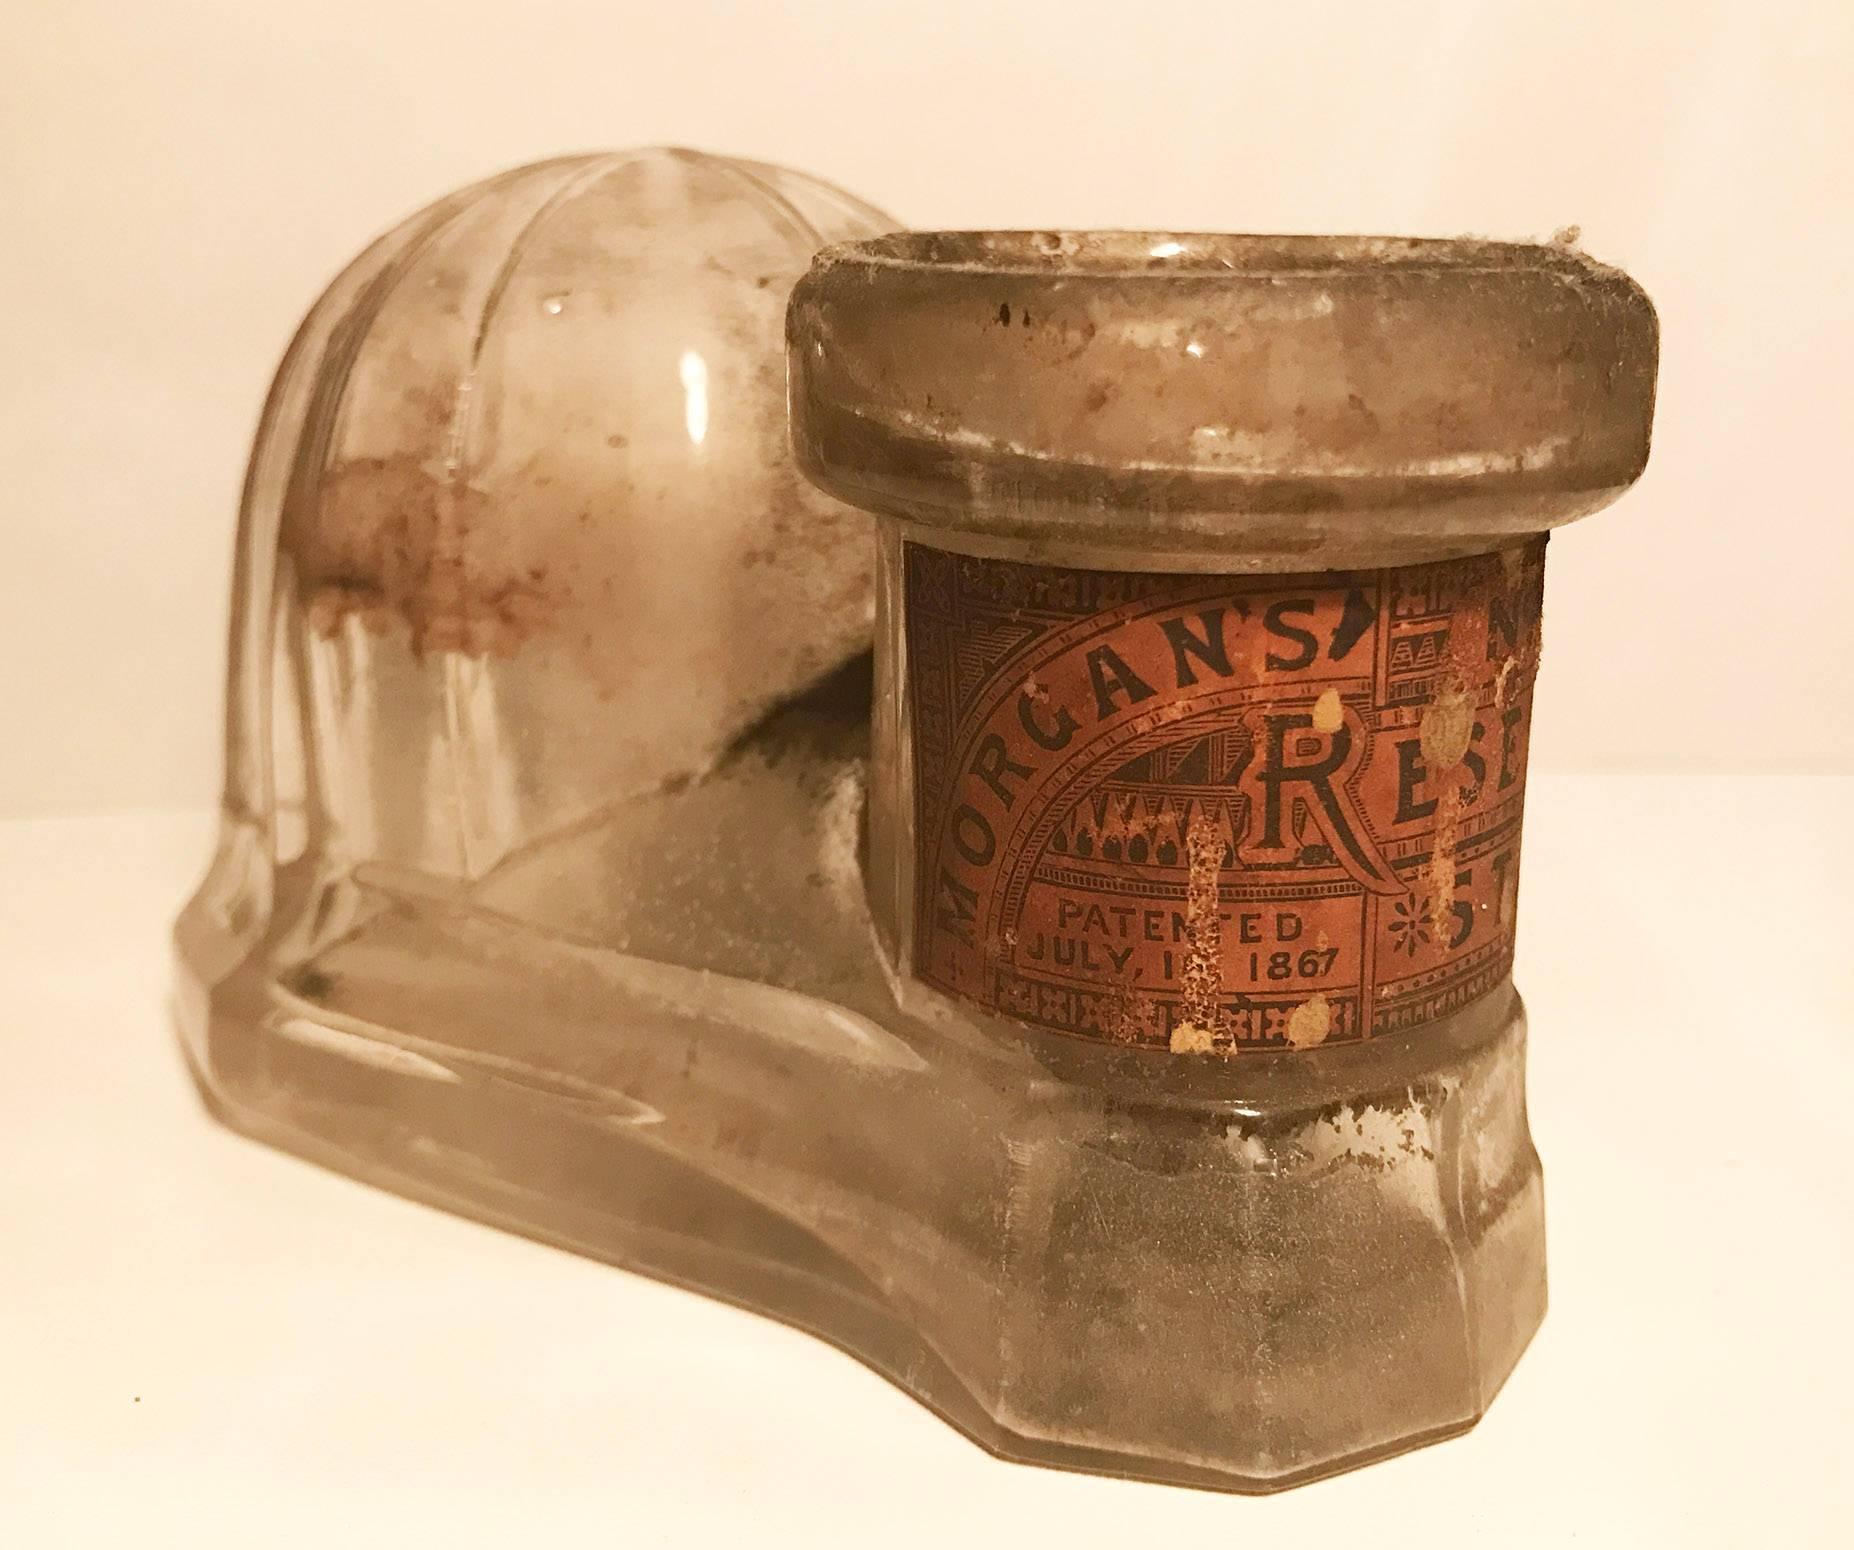 Antique clear dome top glass inkwell bottle reservoir stand Morgan's patent 1867 with paper label.